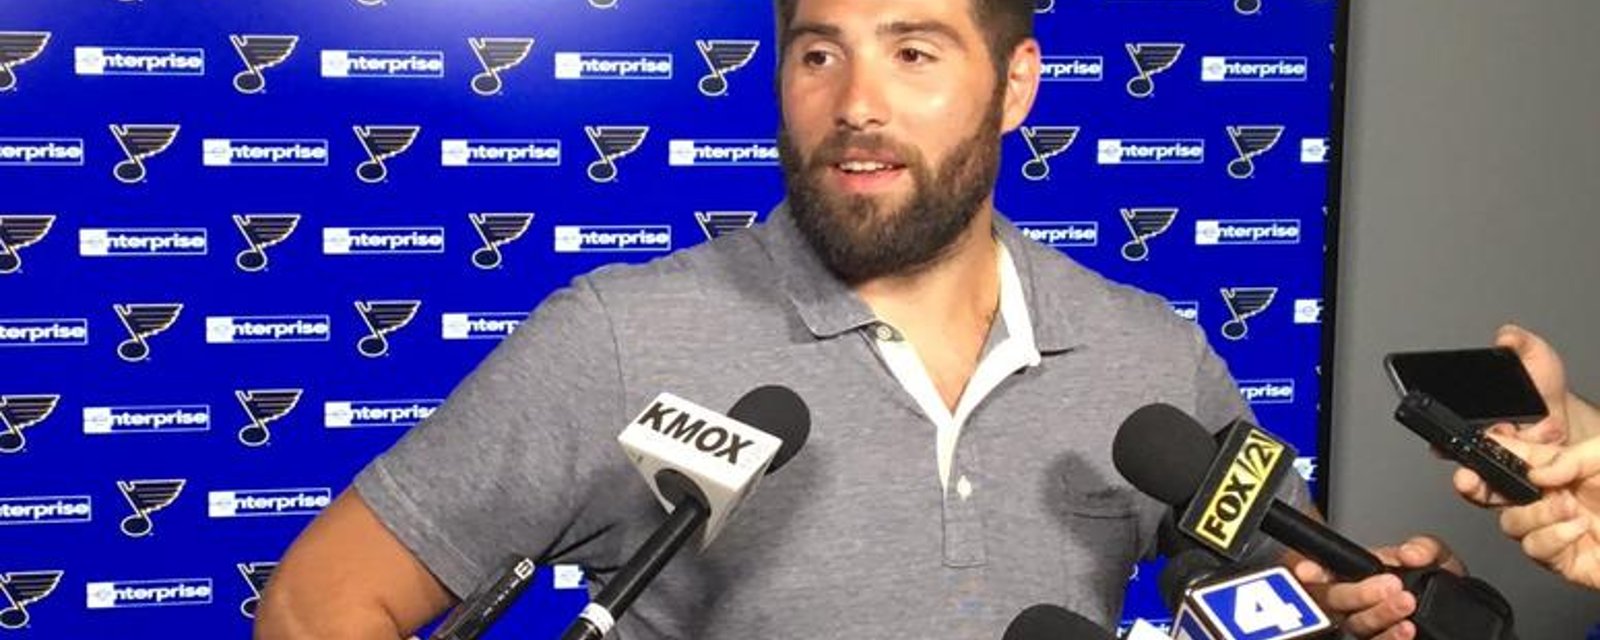 Maroon tells reporters to send THIS message to the Sharks ahead of tonight’s Game 4